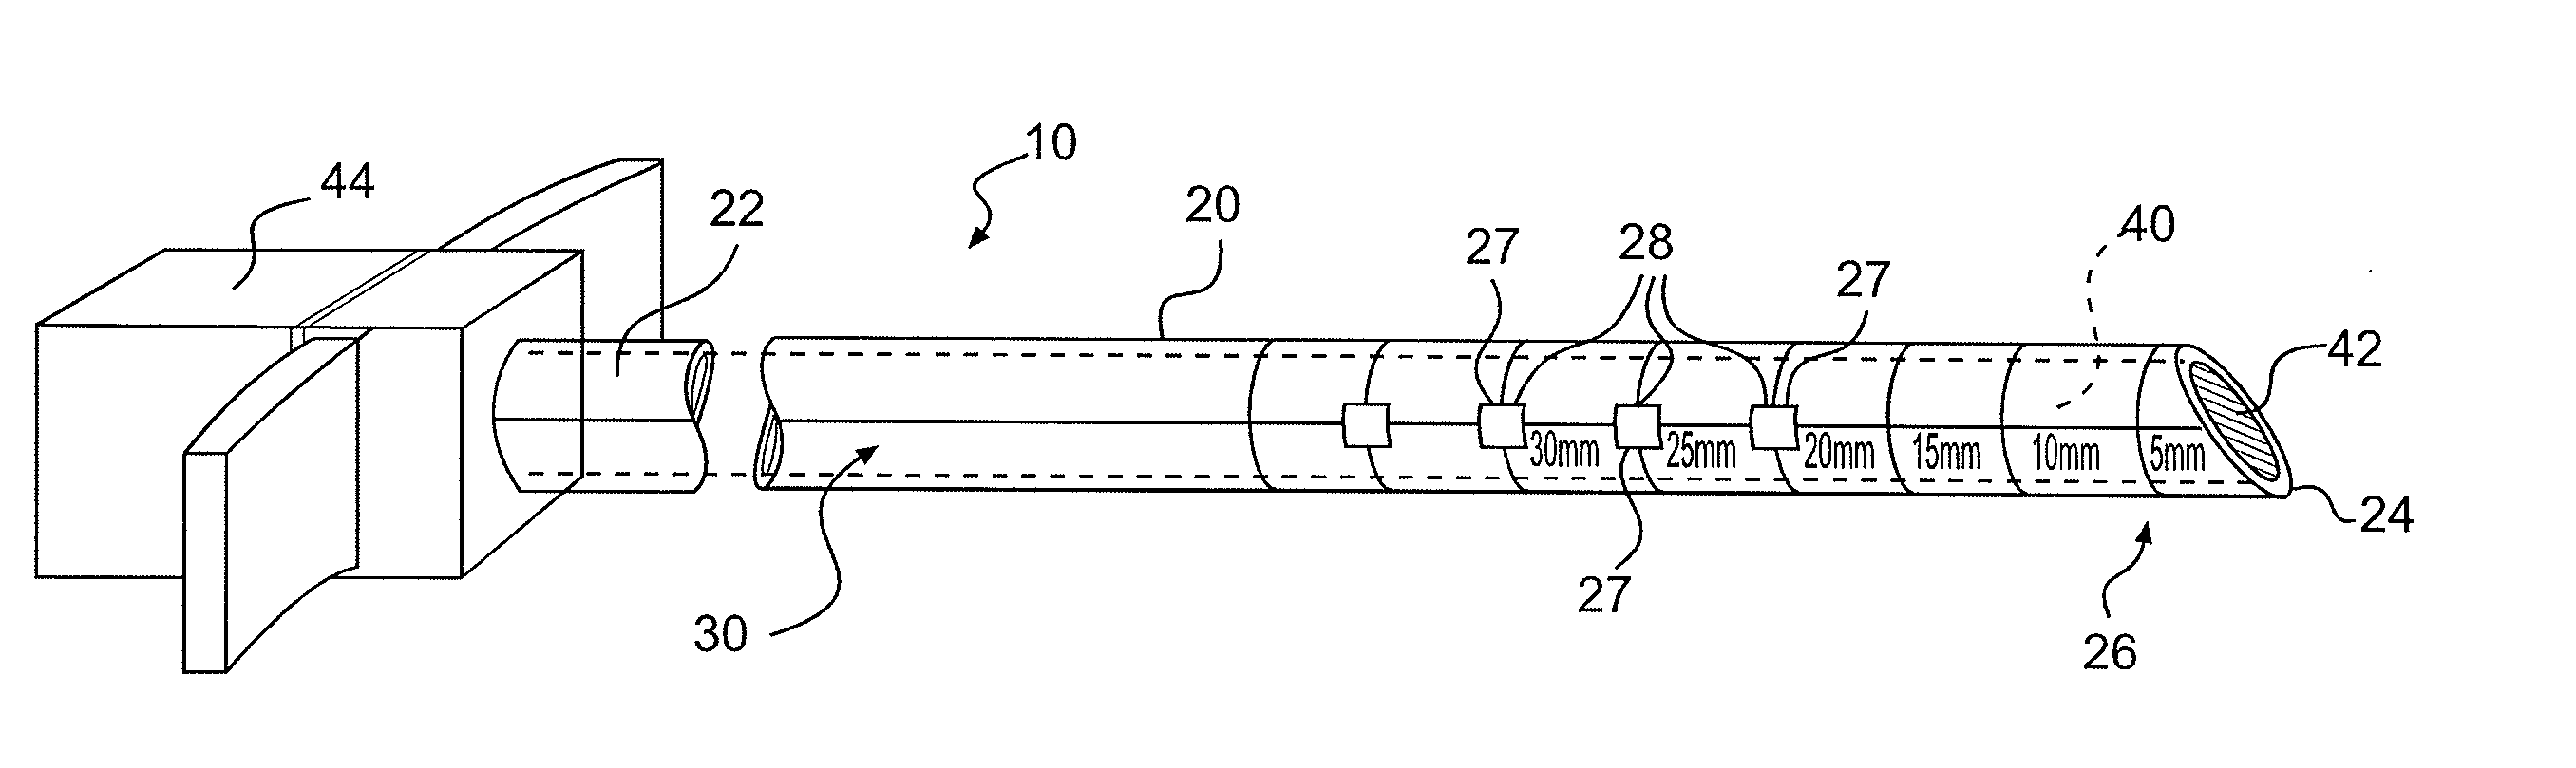 Lumbar puncture detection device